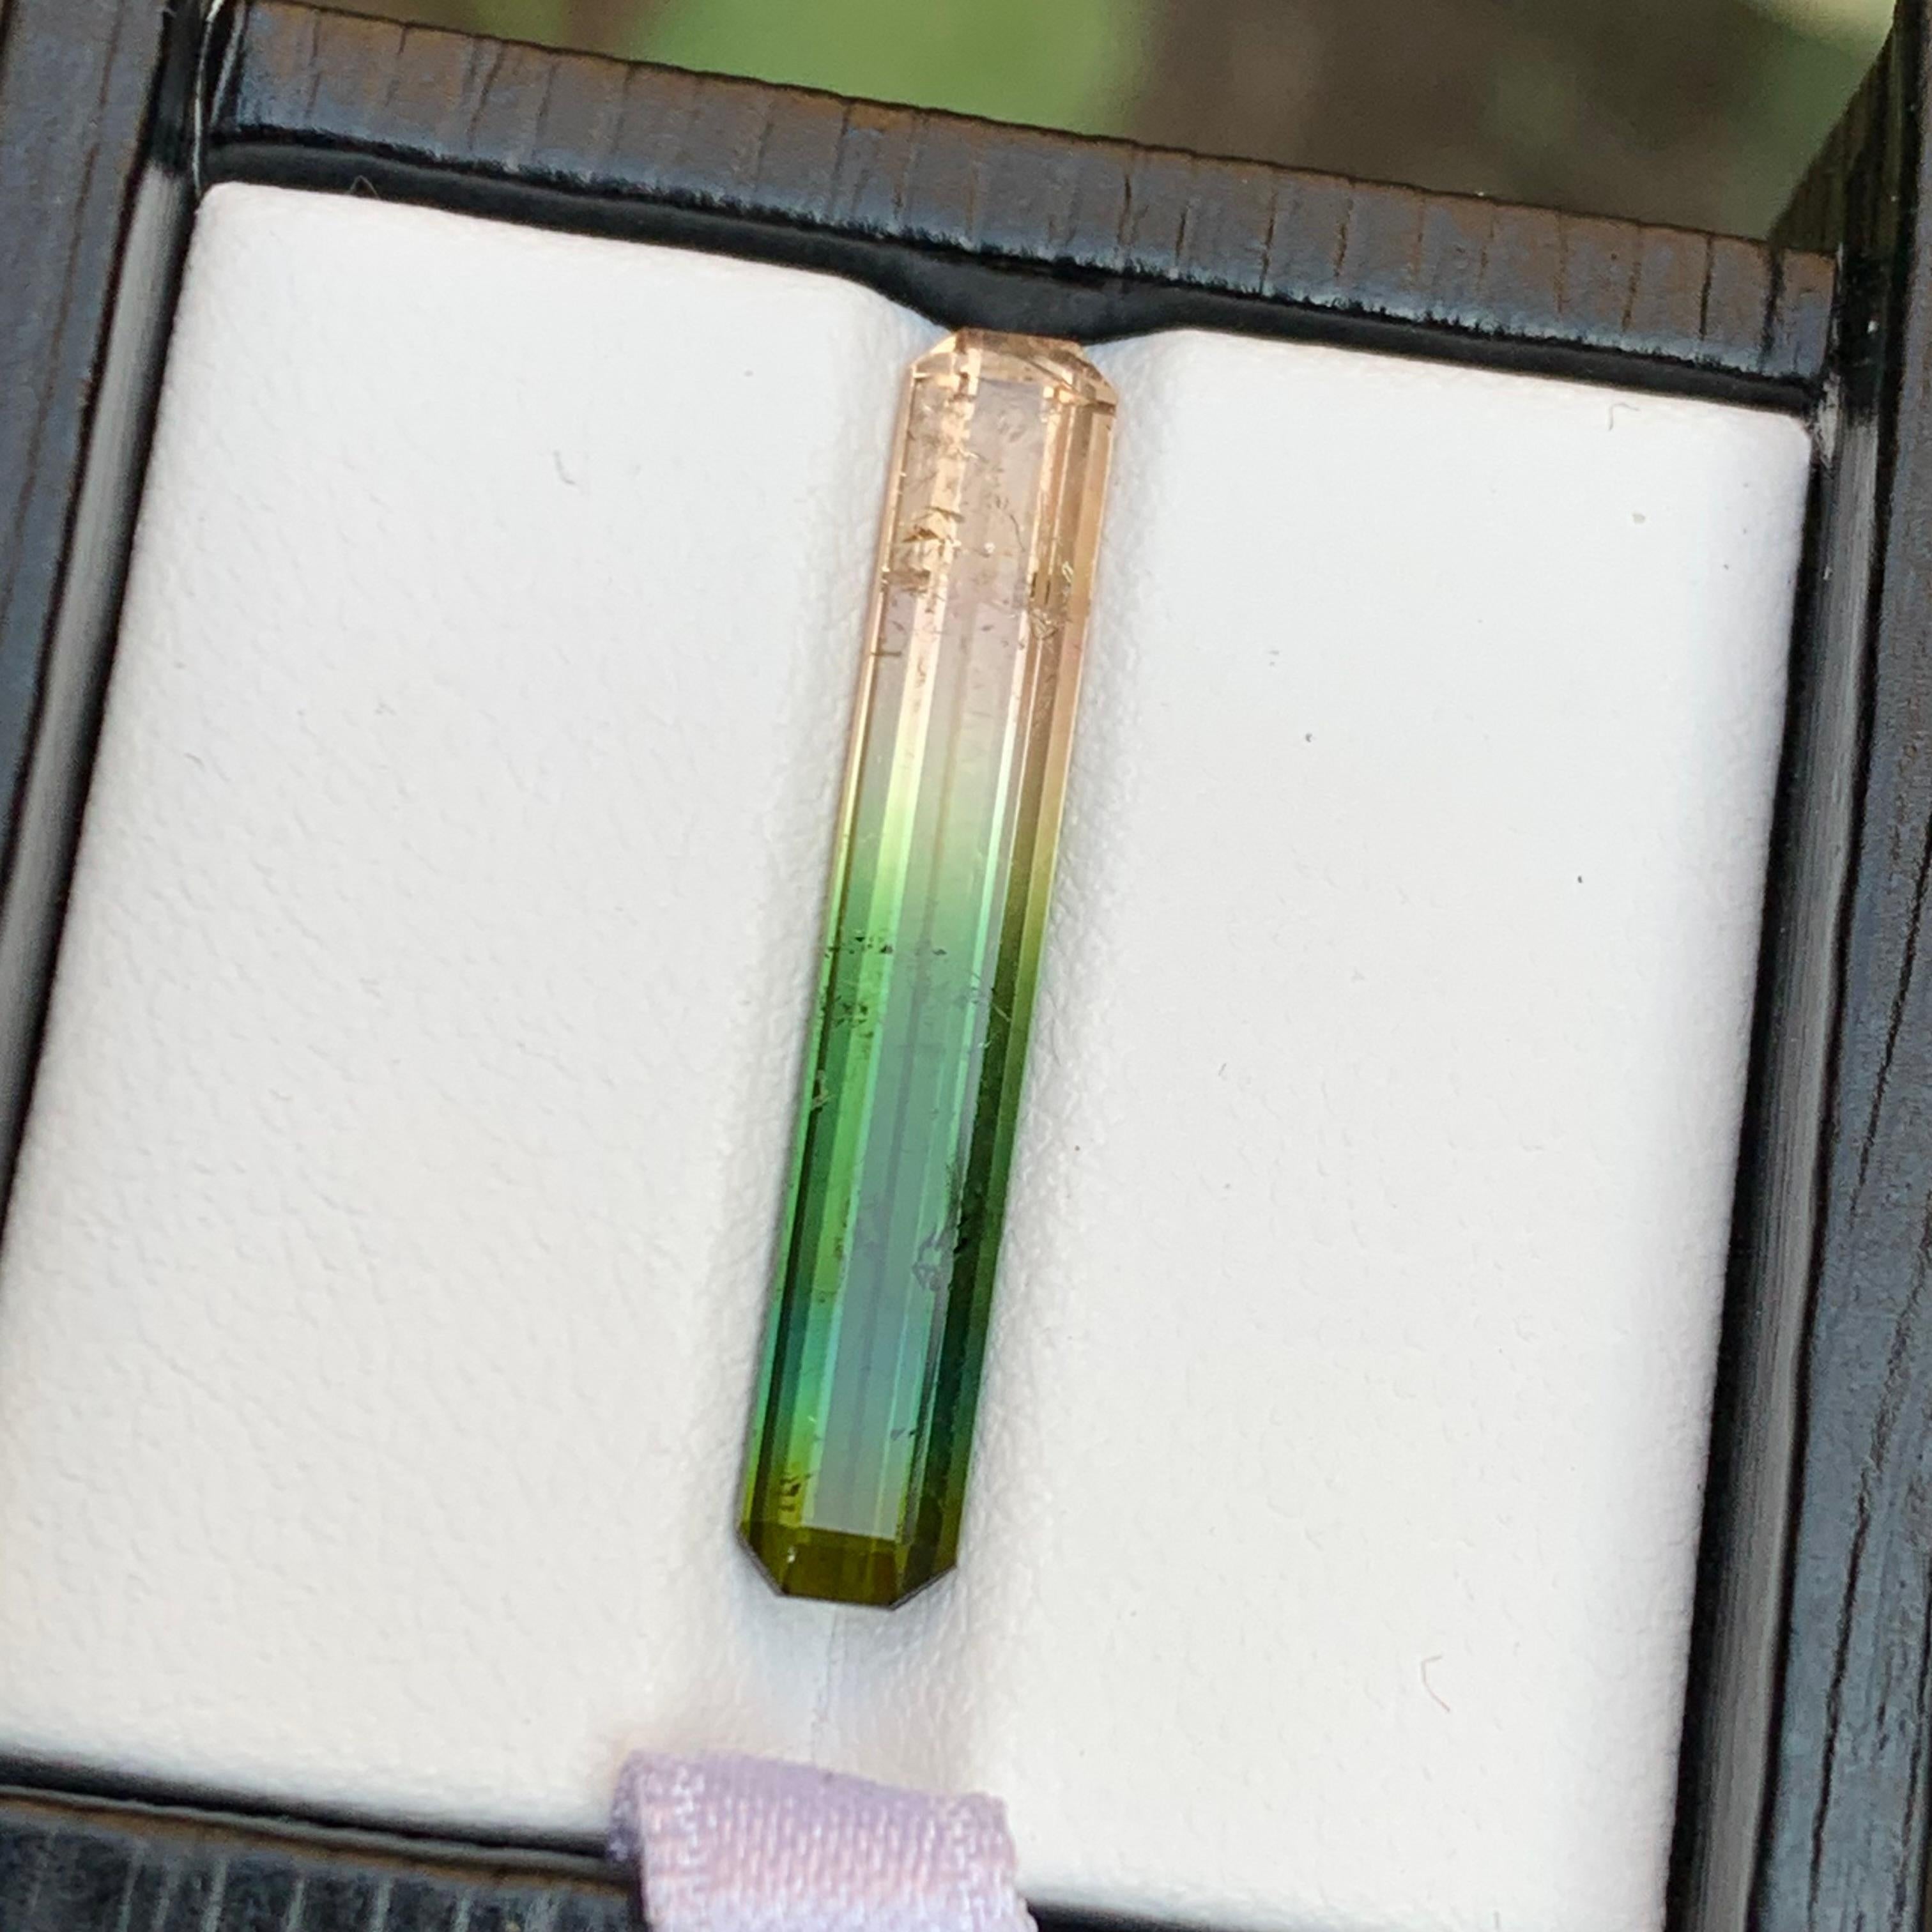 Gorgeous Tricolor Watermelon Natural Tourmaline Loose Gemstone! Meticulously crafted in an elongated emerald cut, this exquisite gem promises to captivate with its vibrant hues. 
Ideal for adorning a distinguished lady or gentleman, it's a testament